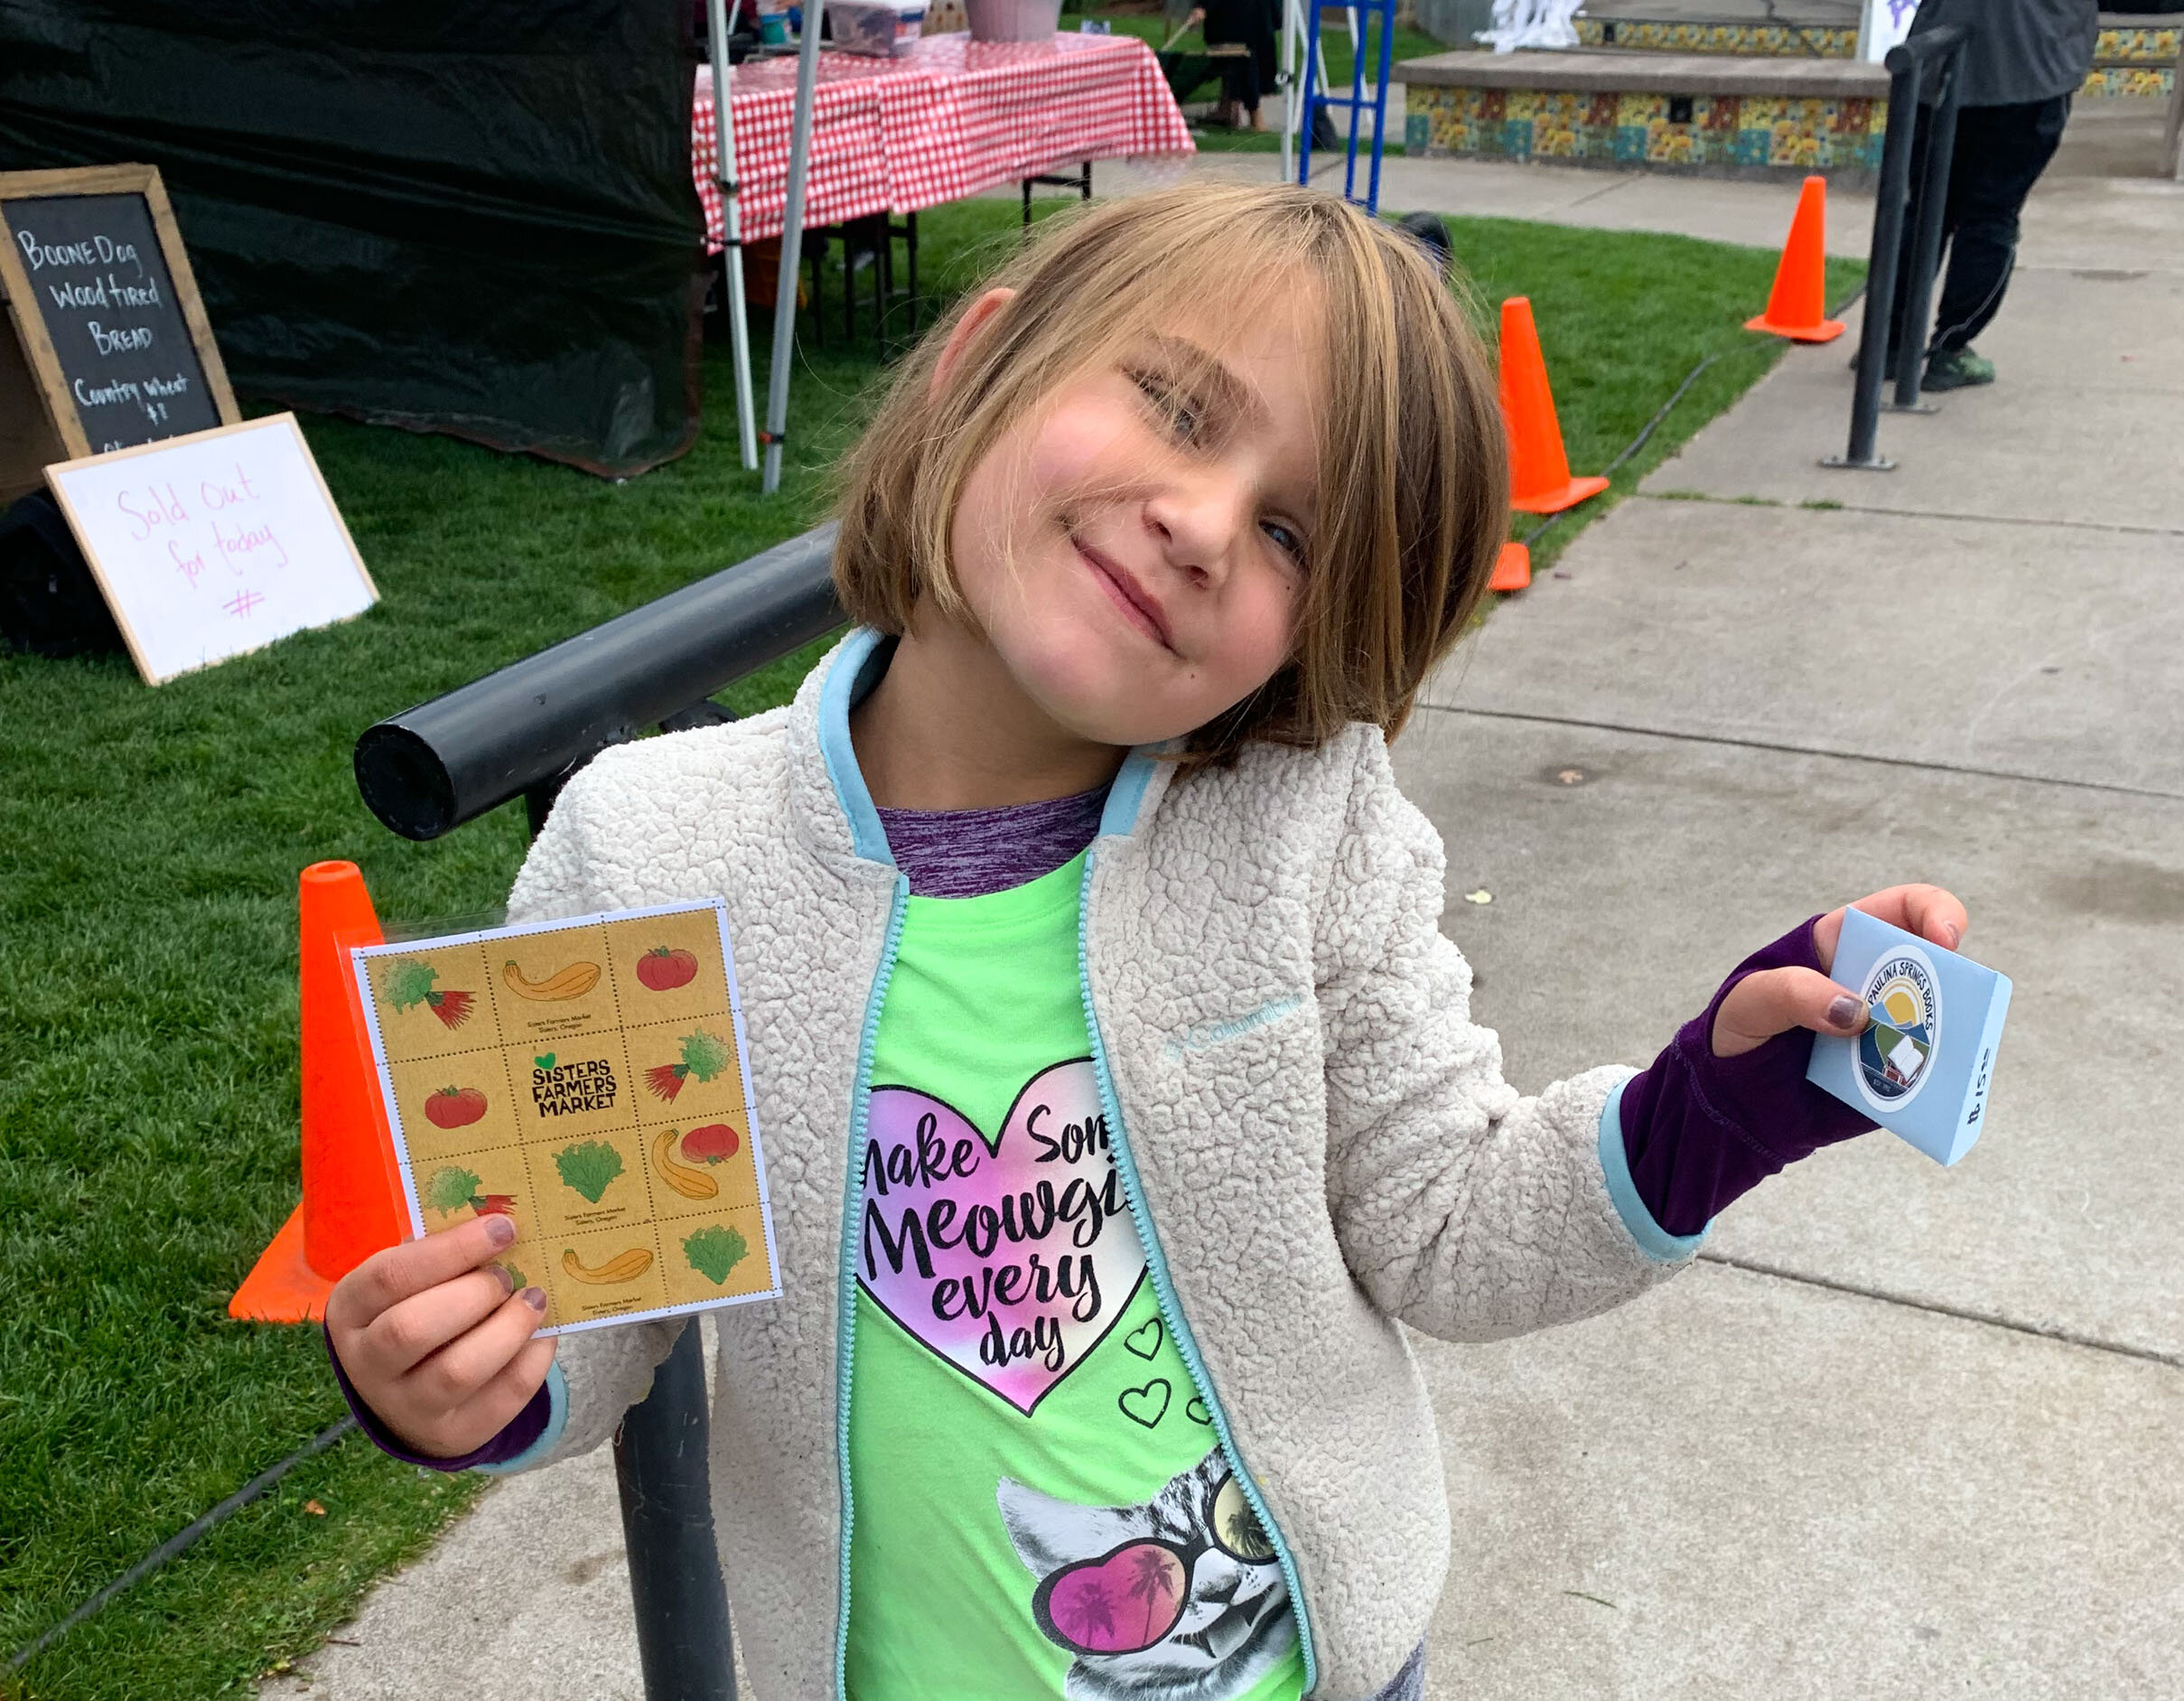  A finalist in the youth category of the Food &amp; Farm Haiku Contest, Nealy Borla won a limited-edition Sisters Farmers Market stamp set from Portland Stamp Company and a gift card to Paulina Springs Books.  